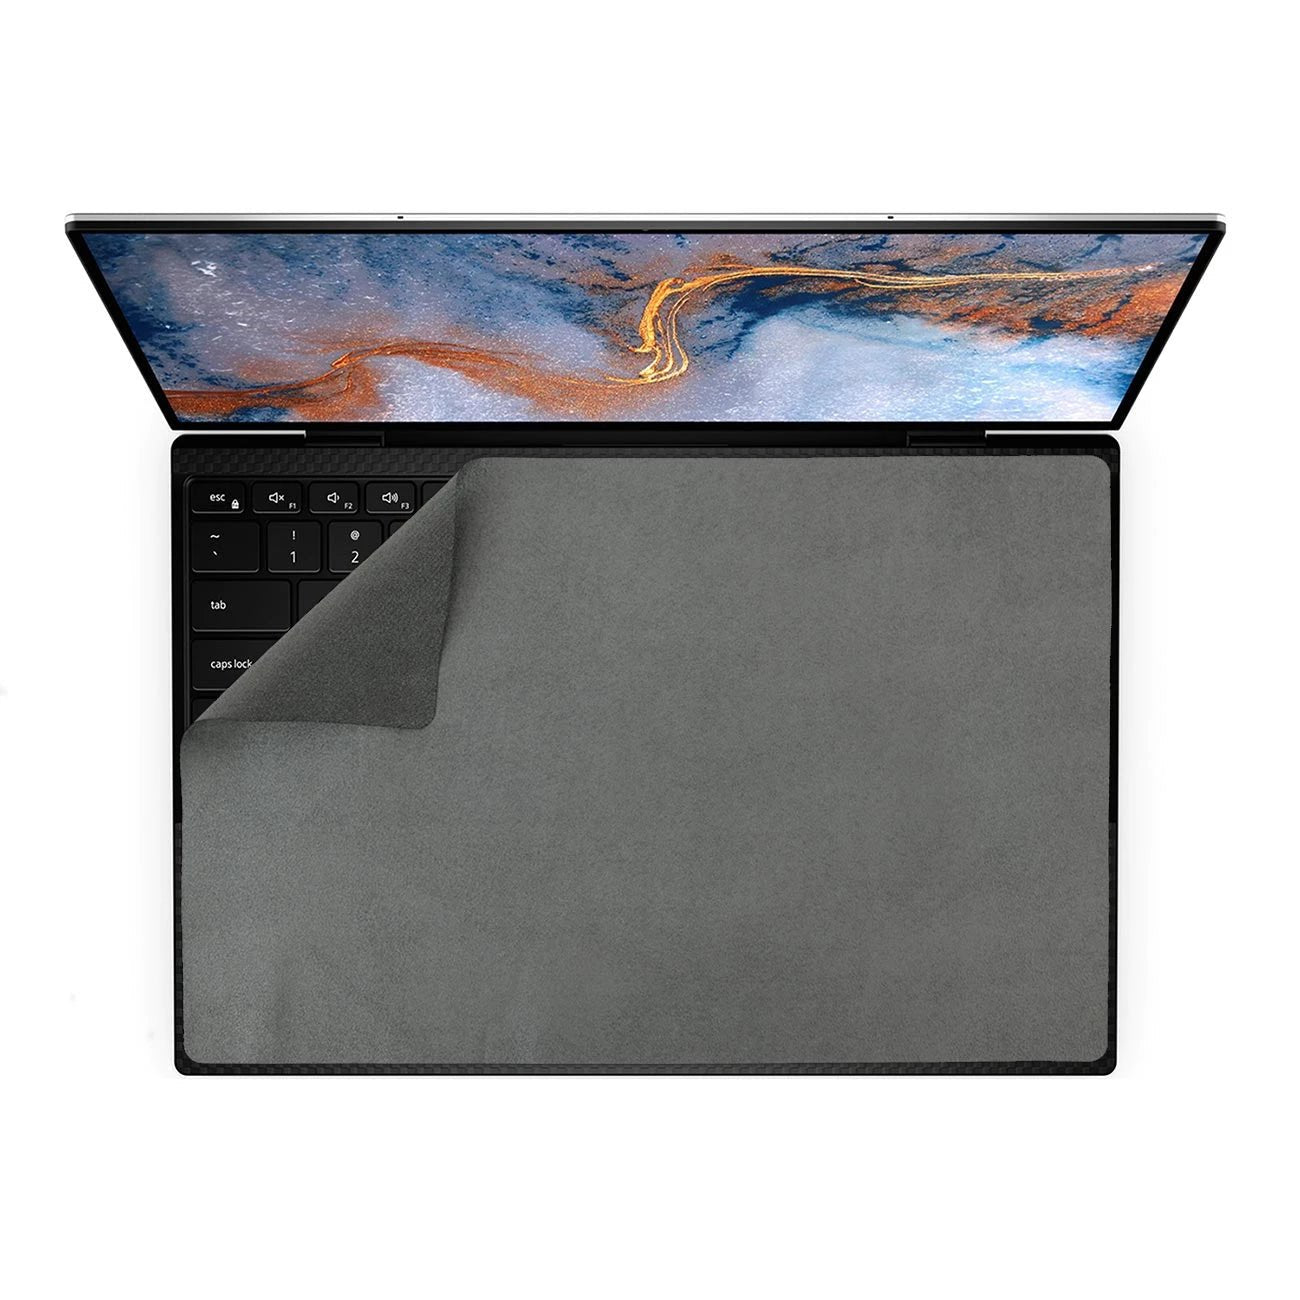 Custom Laptop Screen Protector - Made-To-Order, Microfiber TurboSuede Protective Mat, Made in USA | ShaggyMax